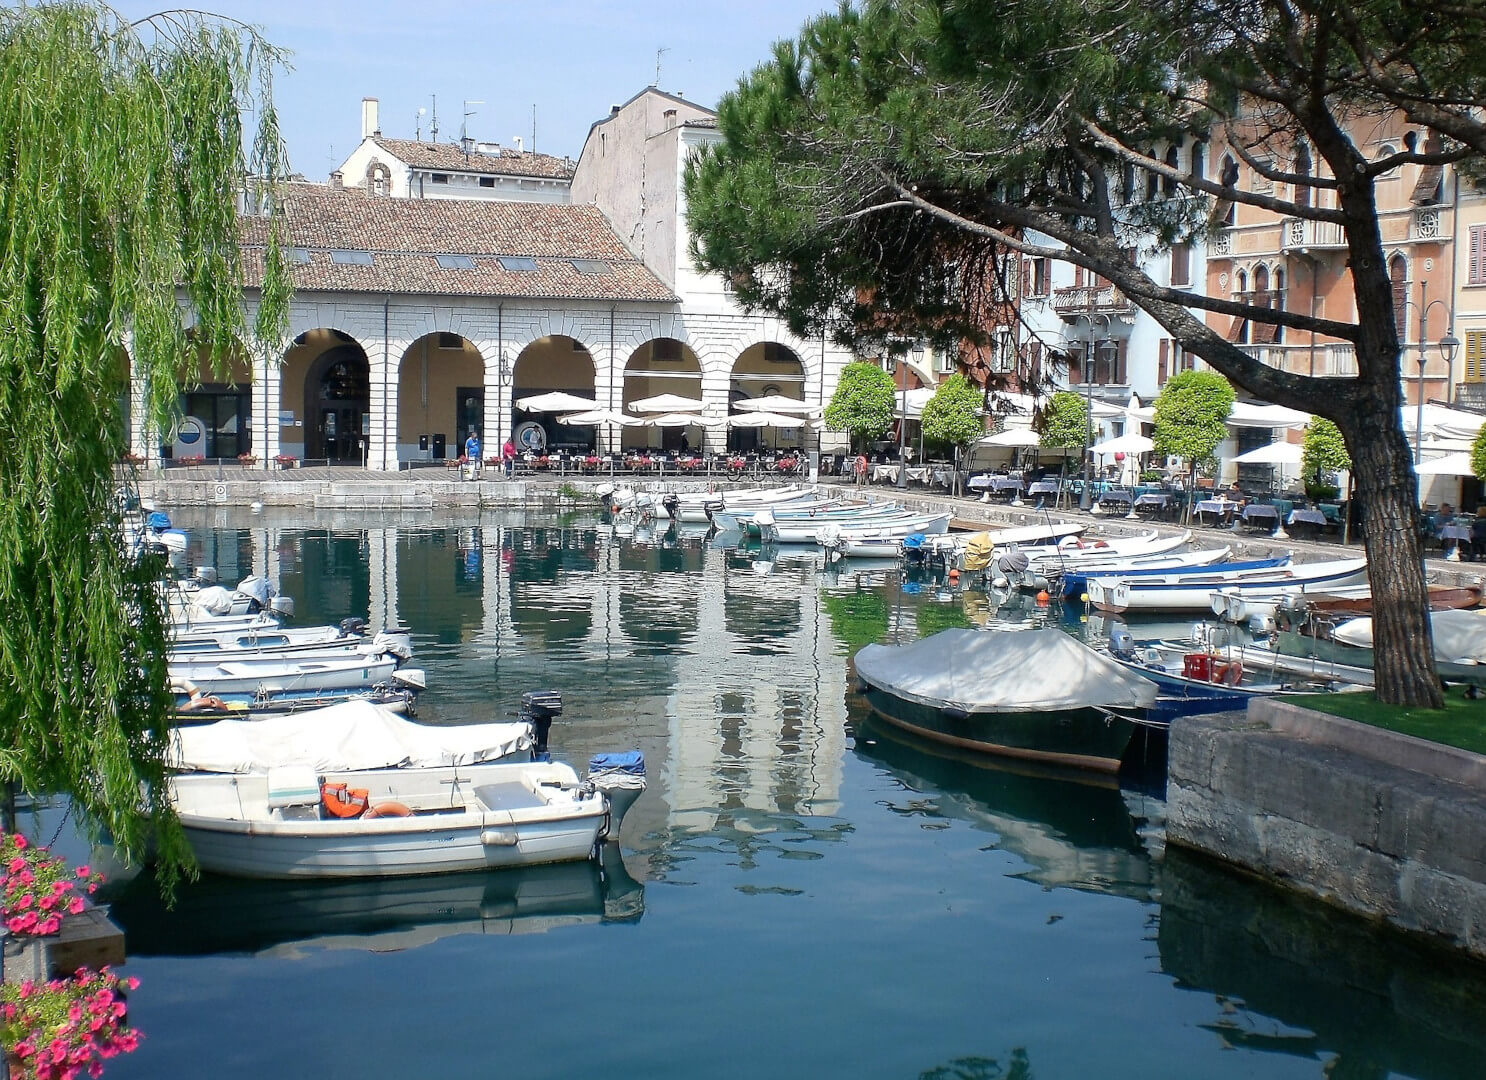 Three things to see in Desenzano